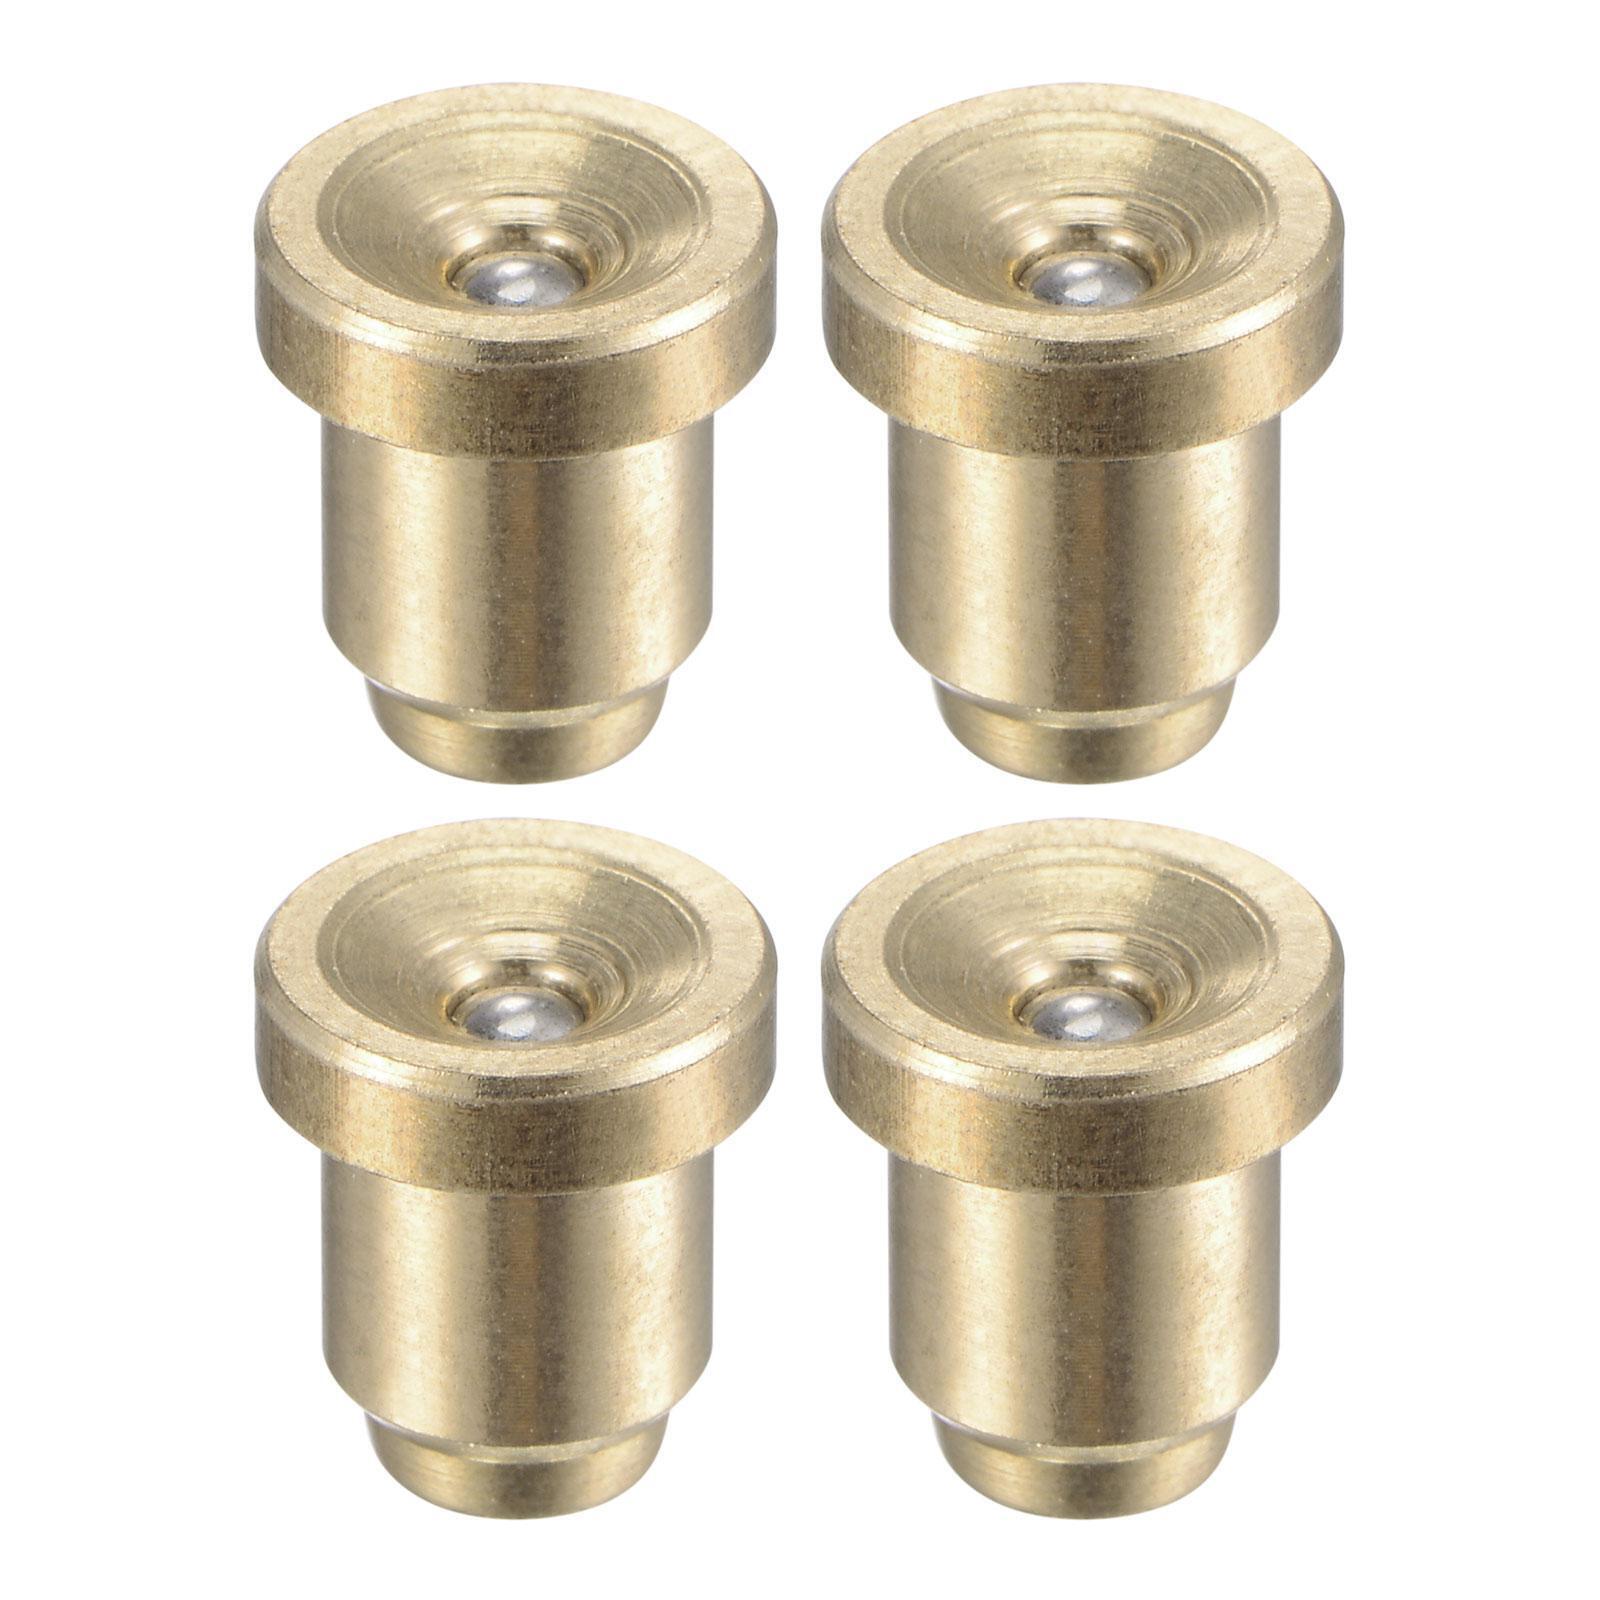 4pcs Brass Push Button Flange Grease Oil Cup 6mm Ball Oiler for Lubrication